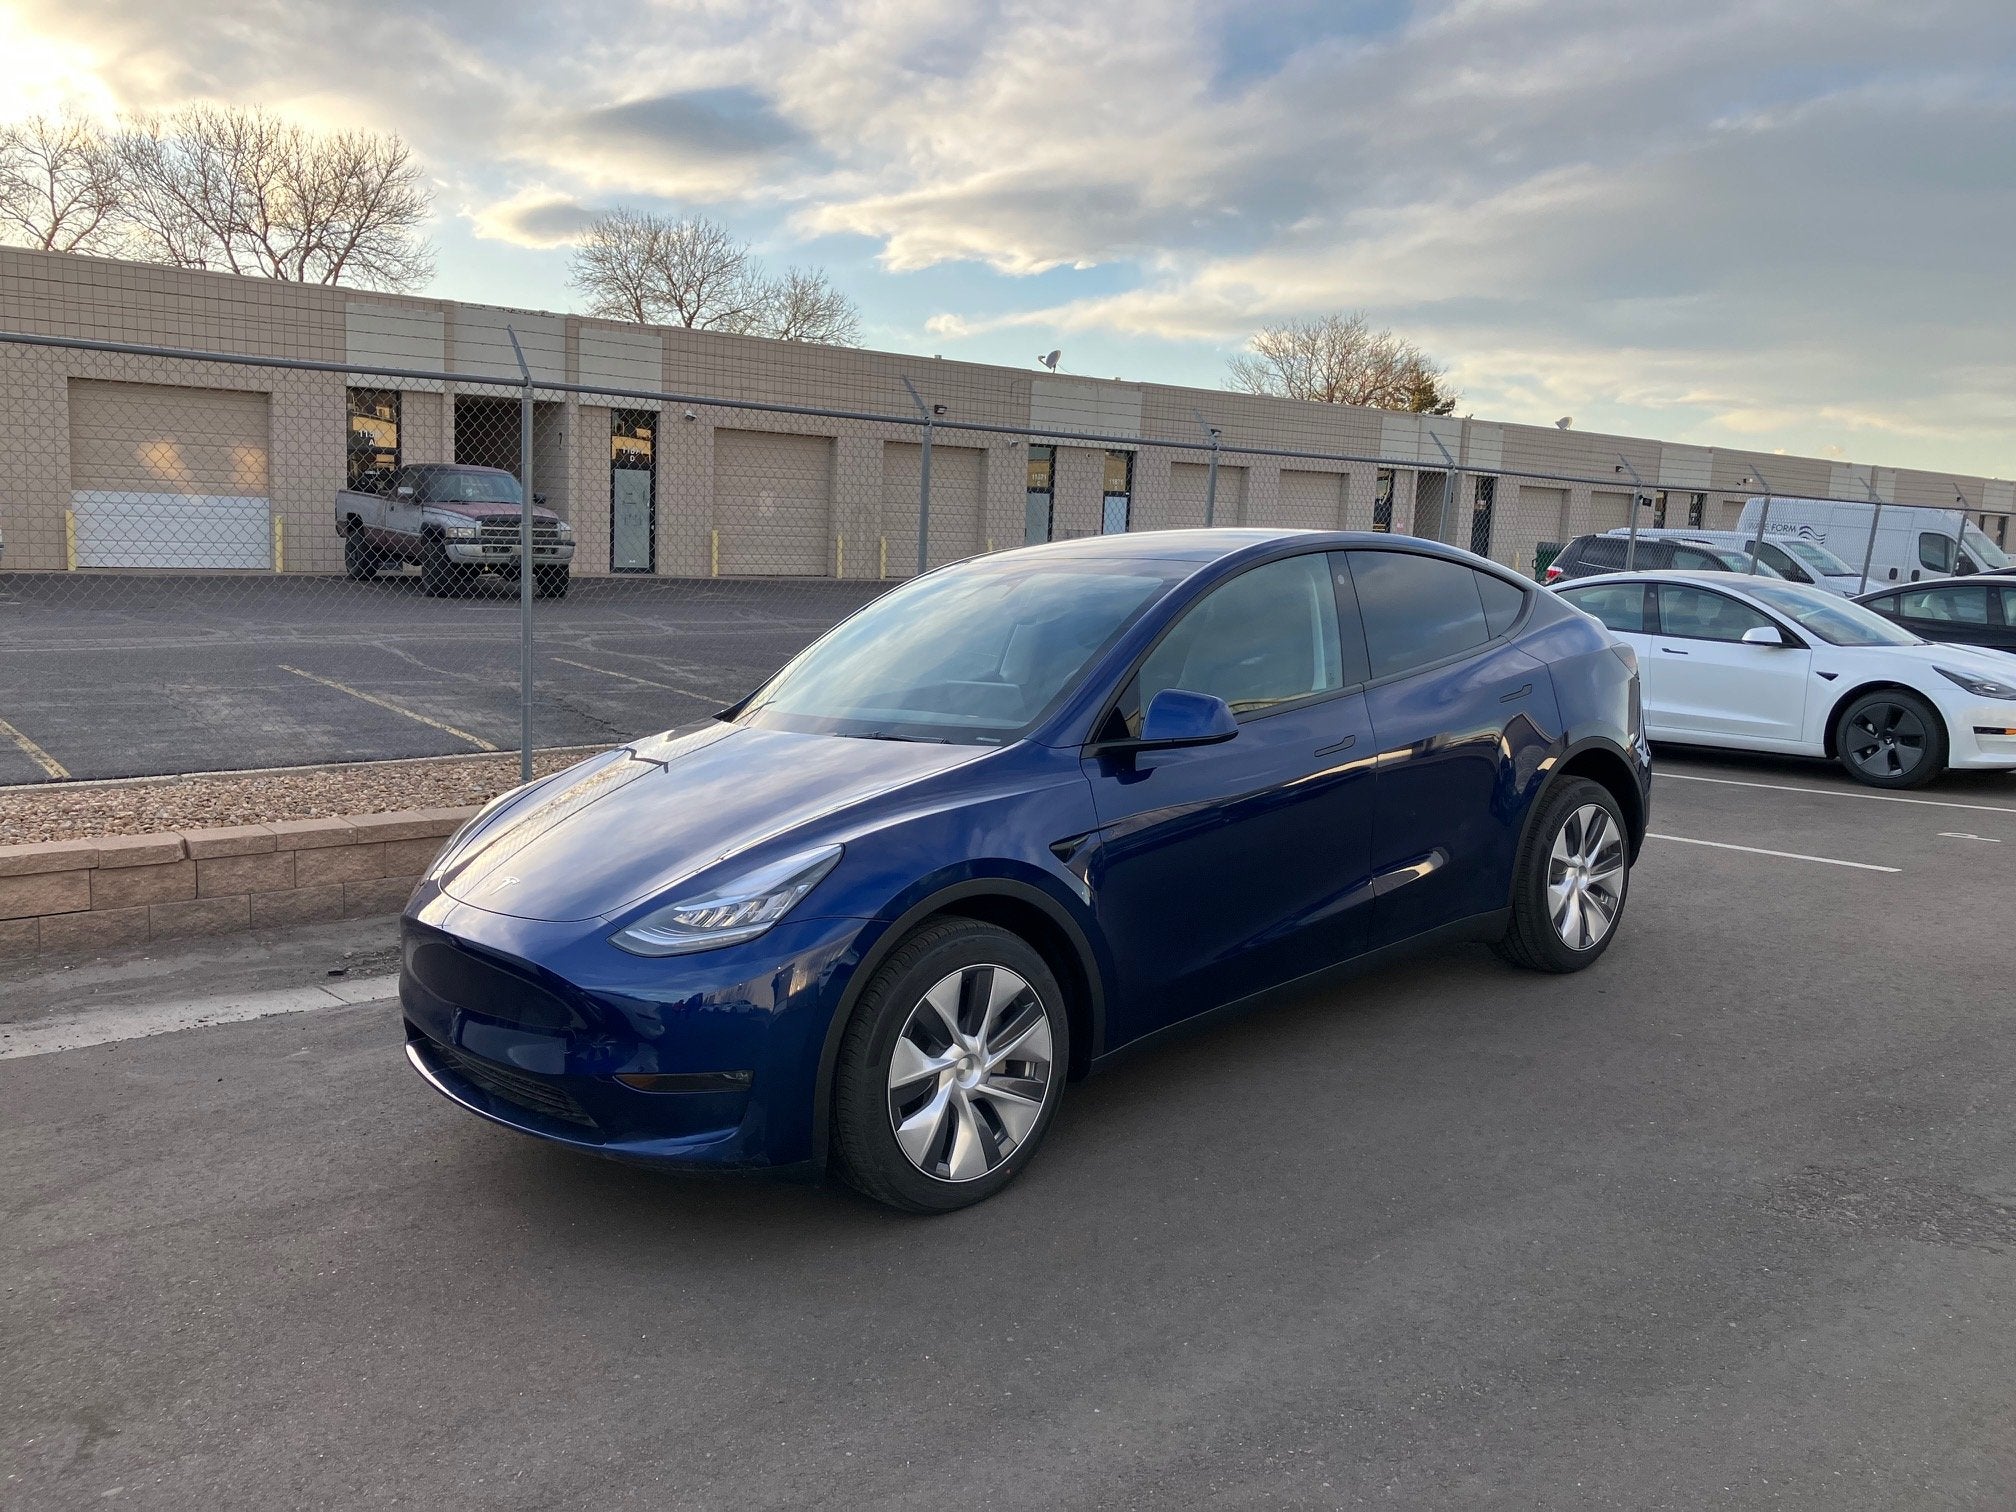 Well I went out and bought a Model Y.